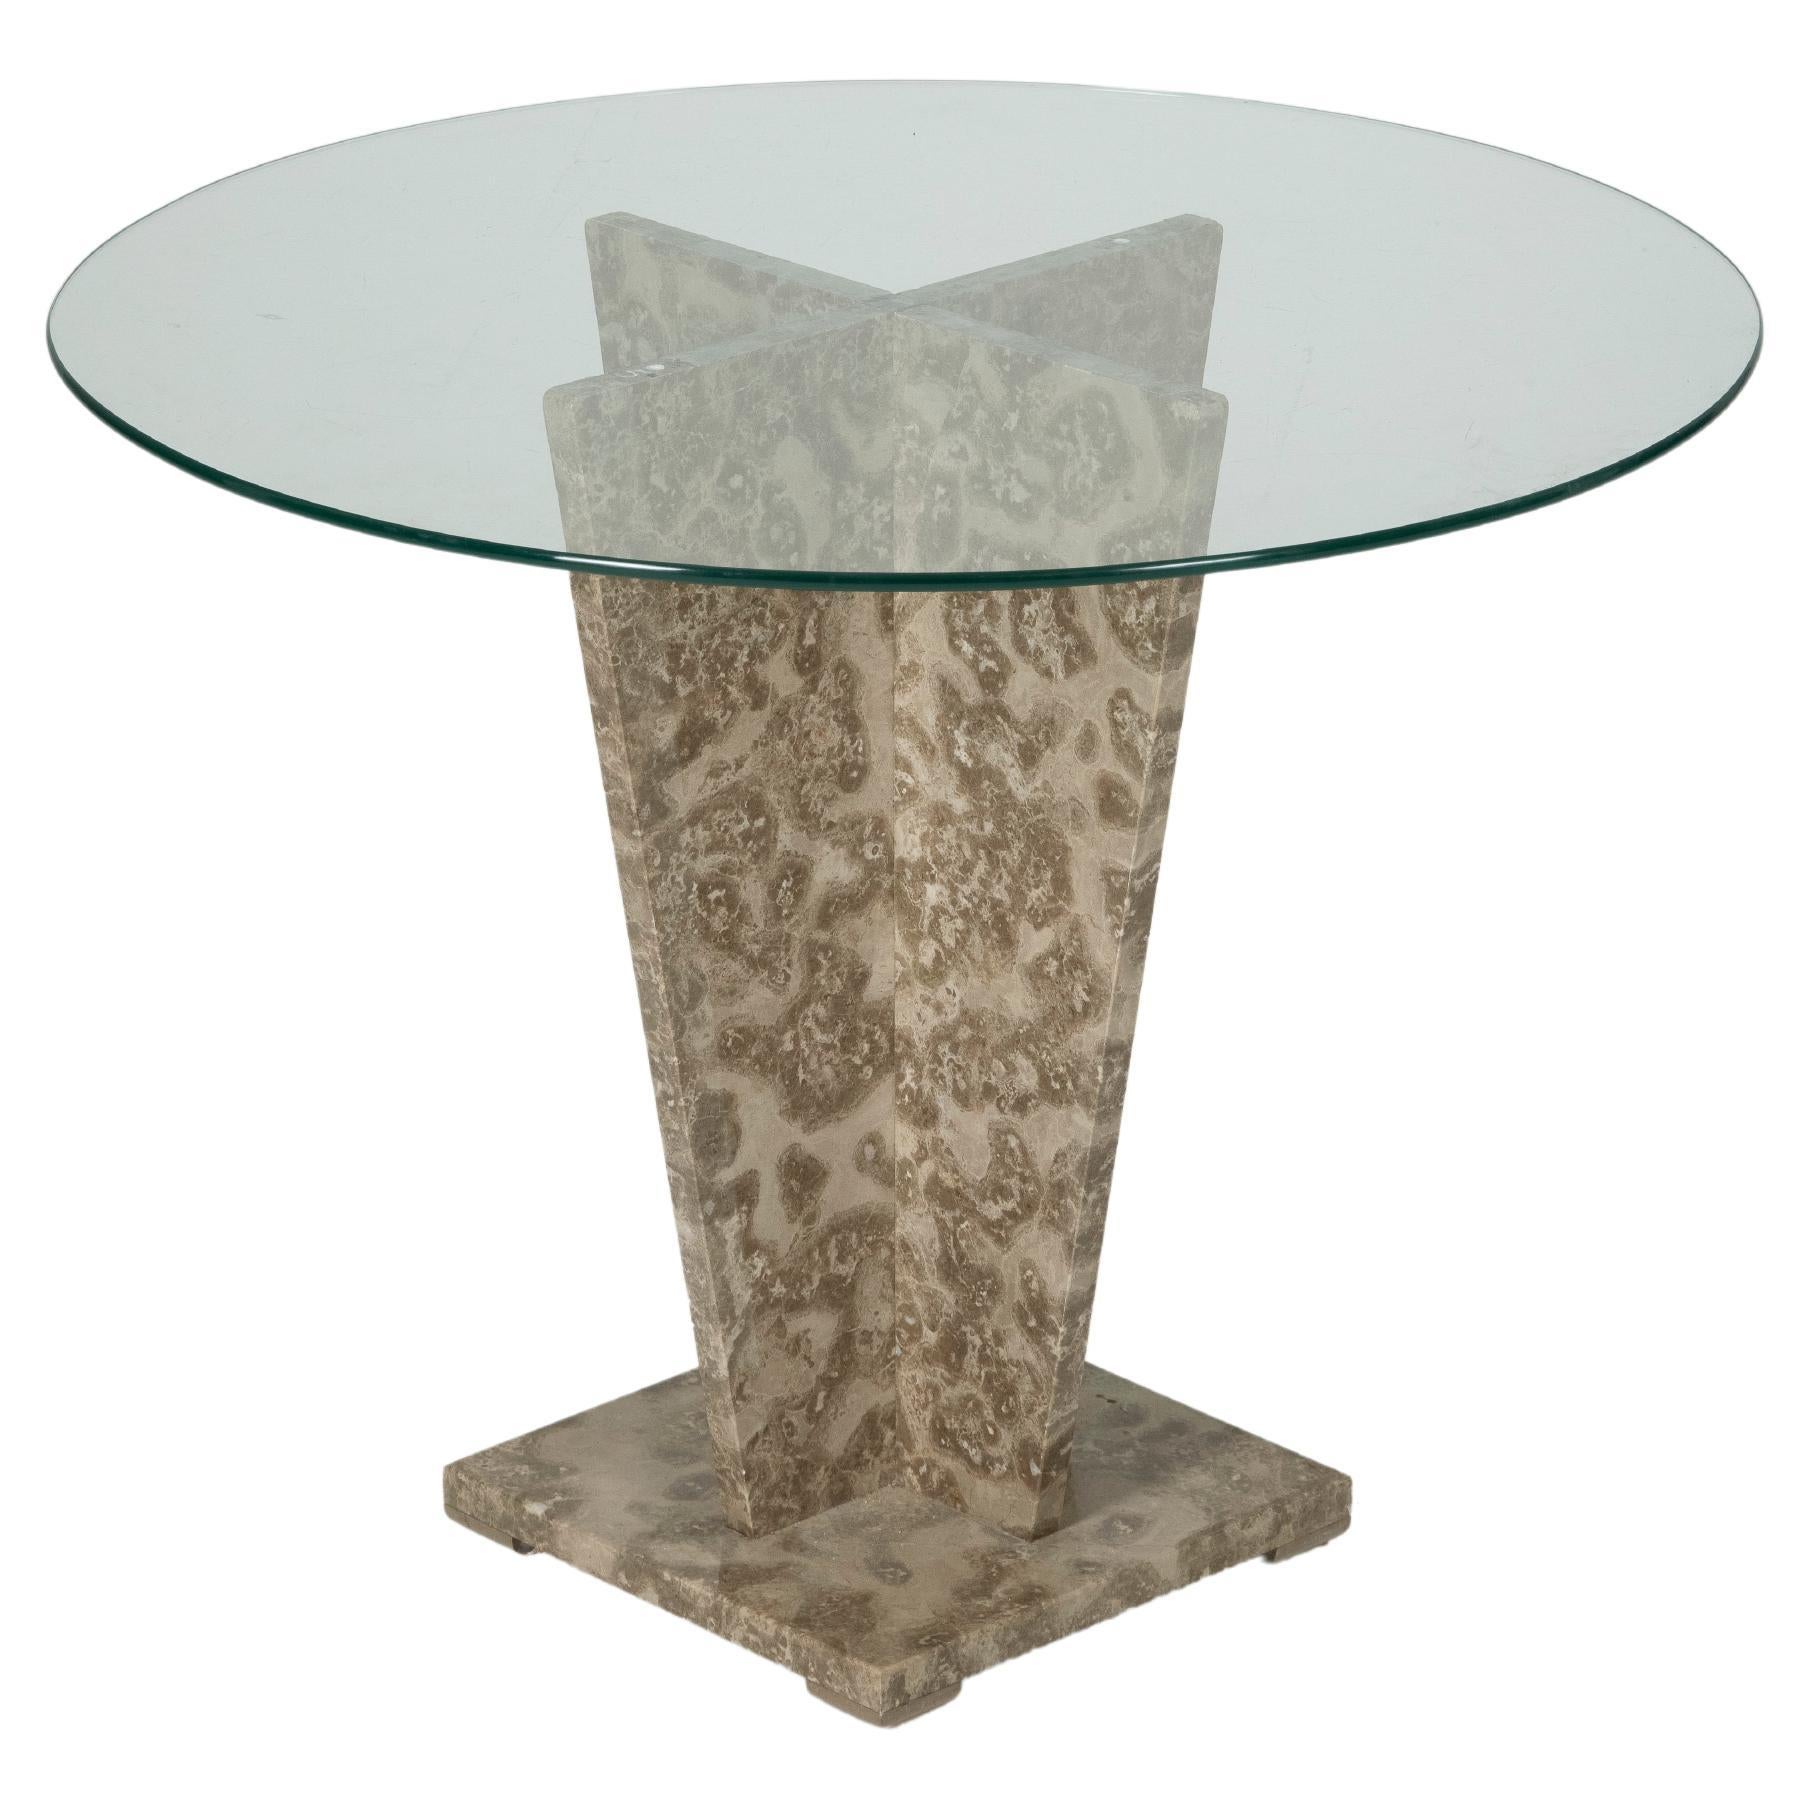 Marble and glass side table